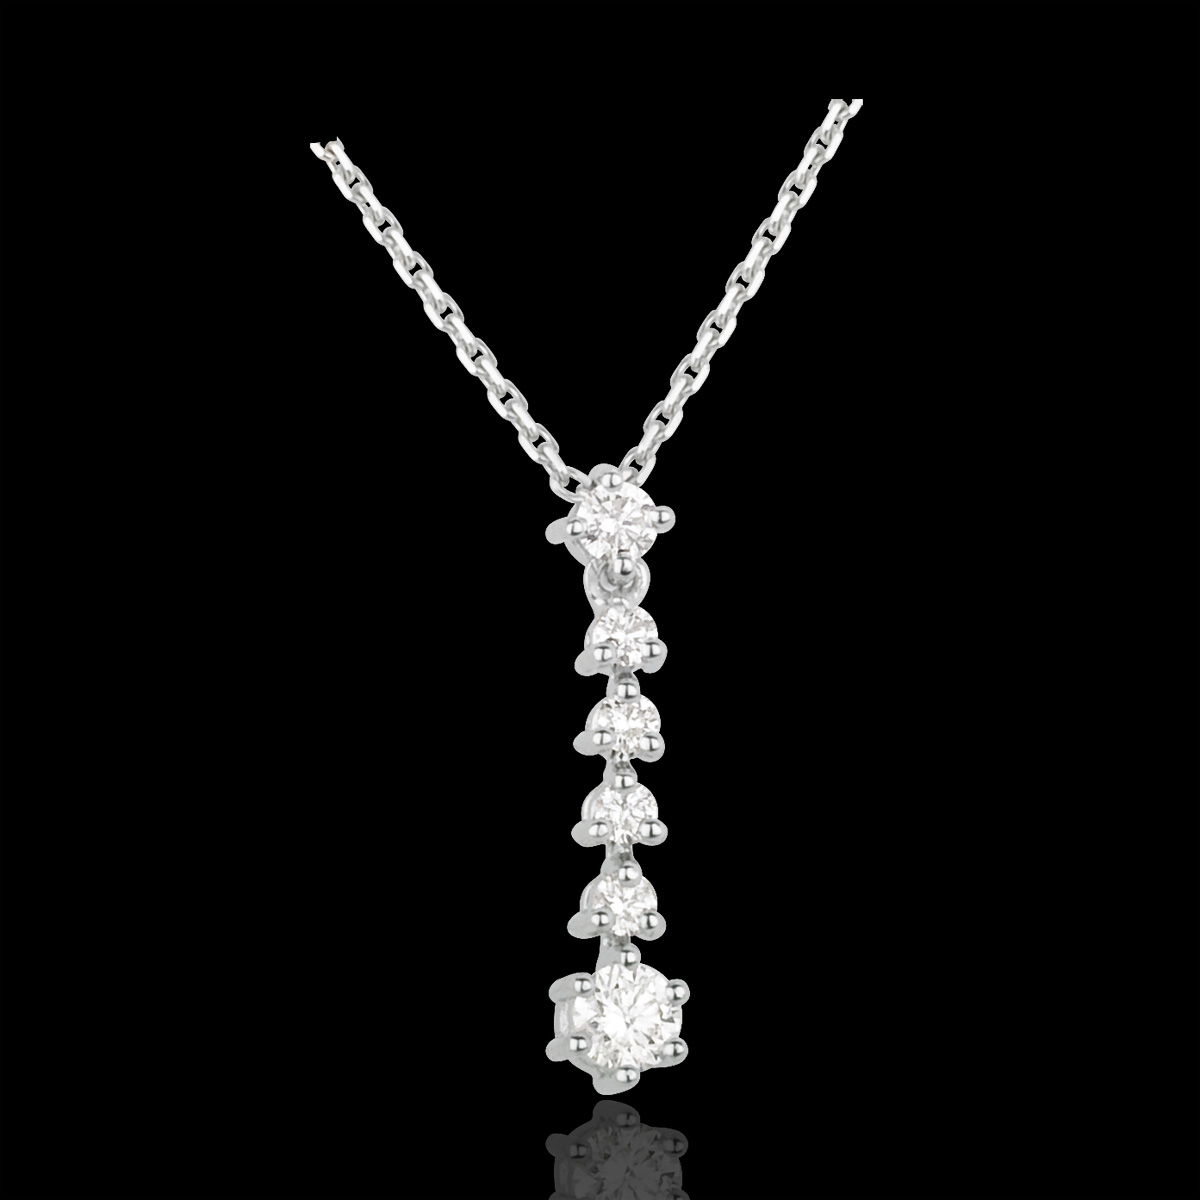 White Gold and Diamond Snowflake Necklace : Edenly jewellery